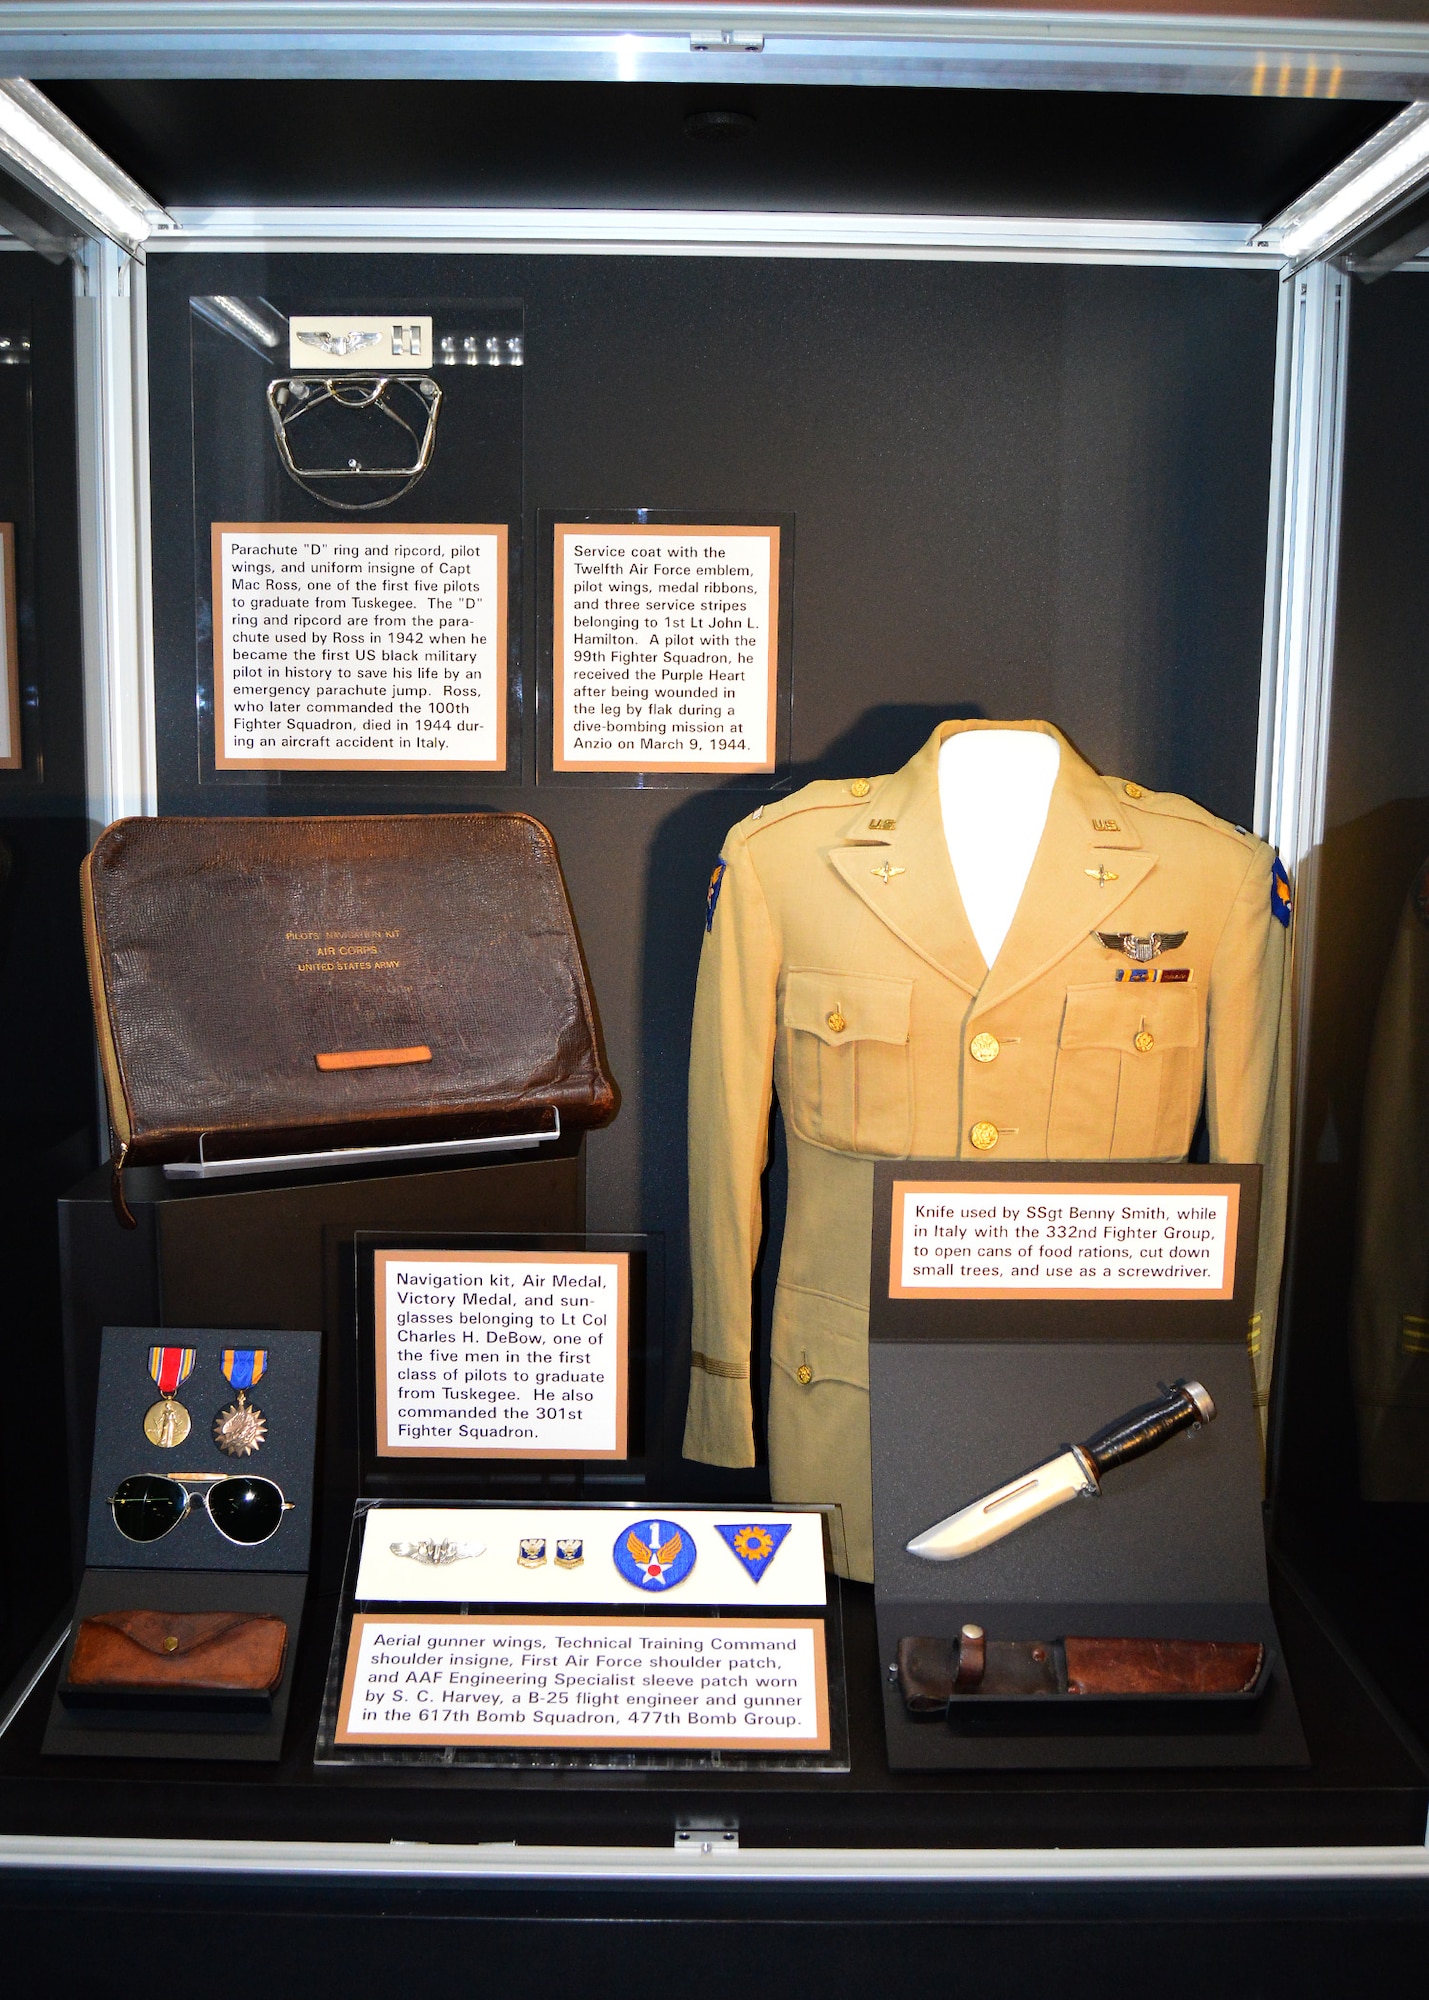 DAYTON, Ohio -- Various artifacts on display in the Tuskegee Airmen Exhibit in the WWII Gallery at the National Museum of the U.S. Air Force. (U.S. Air Force photo)